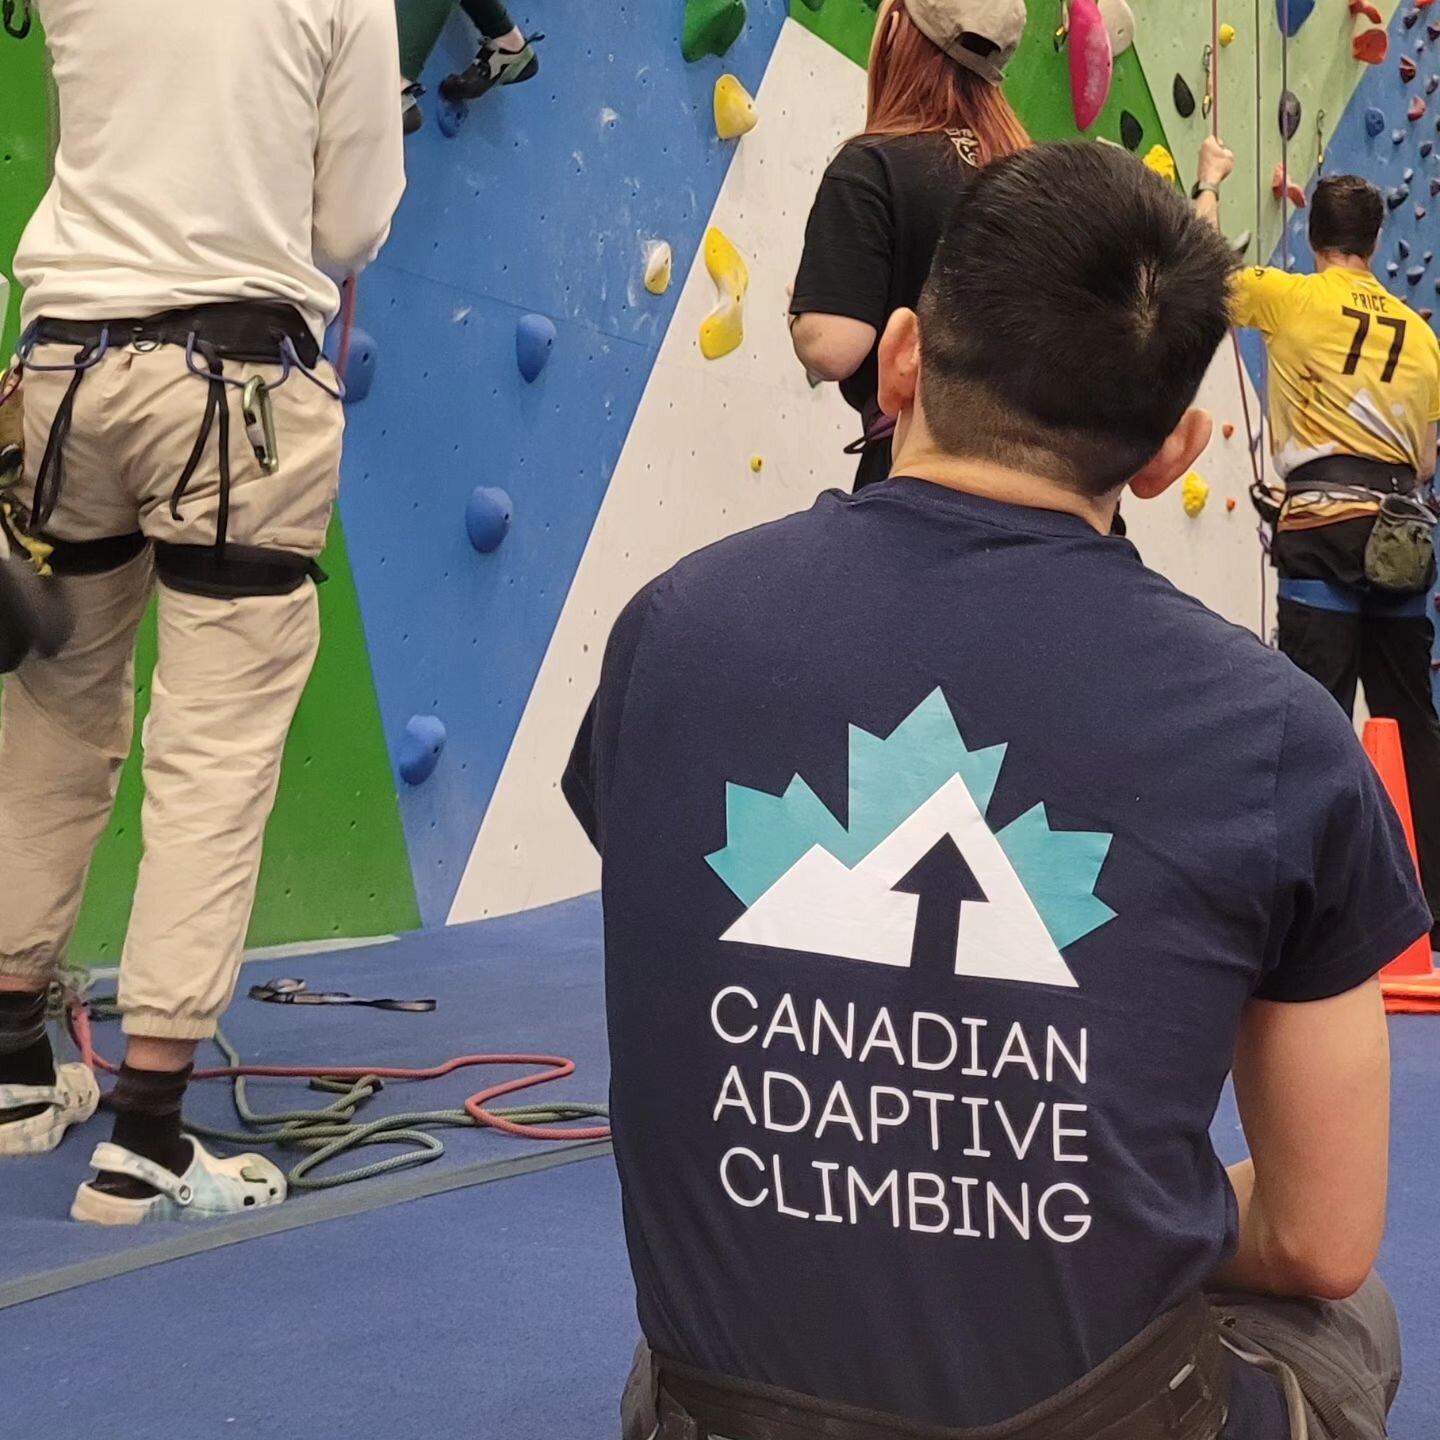 Yesterday Miranda and Kate from @canadian.adaptive.climbing collaborated on a volunteer training session at Base Camp Bloor West. (@basecampclimbing_bw)

Every adaptive climbing group runs in their own unique way, and being able to swap gear knowledg